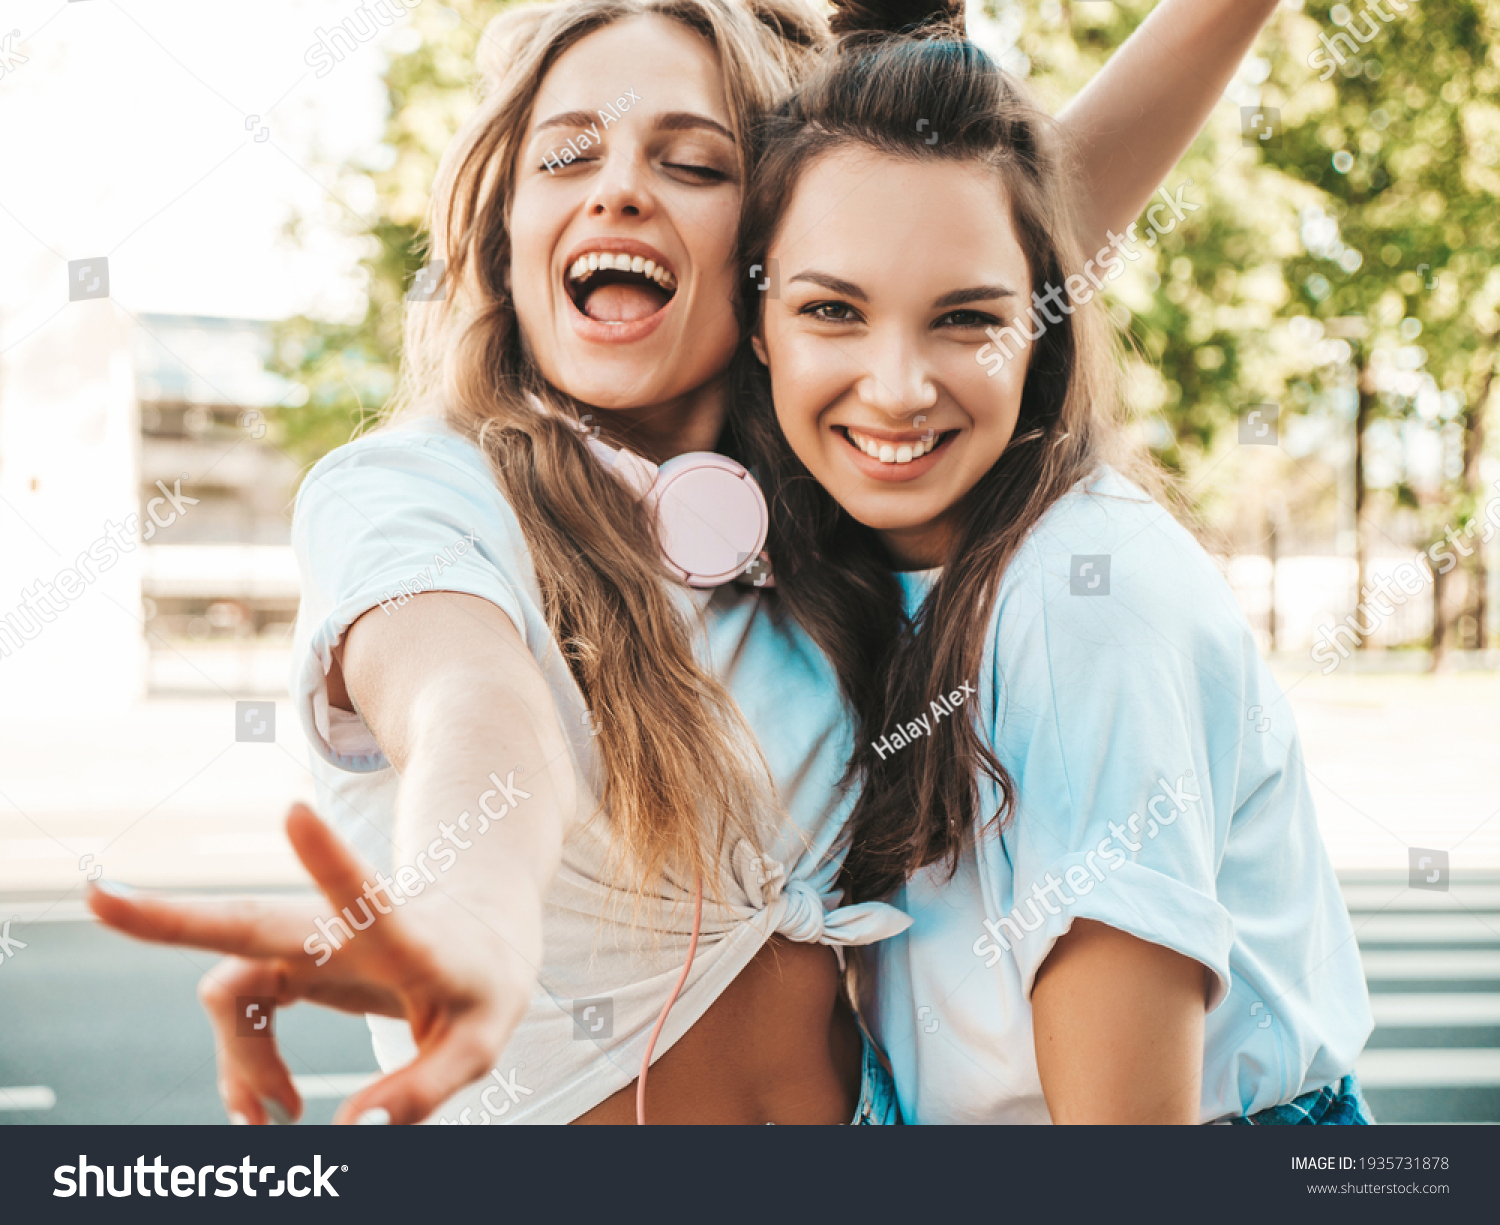 Portrait of two young beautiful smiling hipster female in trendy summer white t-shirt clothes.Sexy carefree women posing on street background. Positive models having fun, hugging and going crazy #1935731878